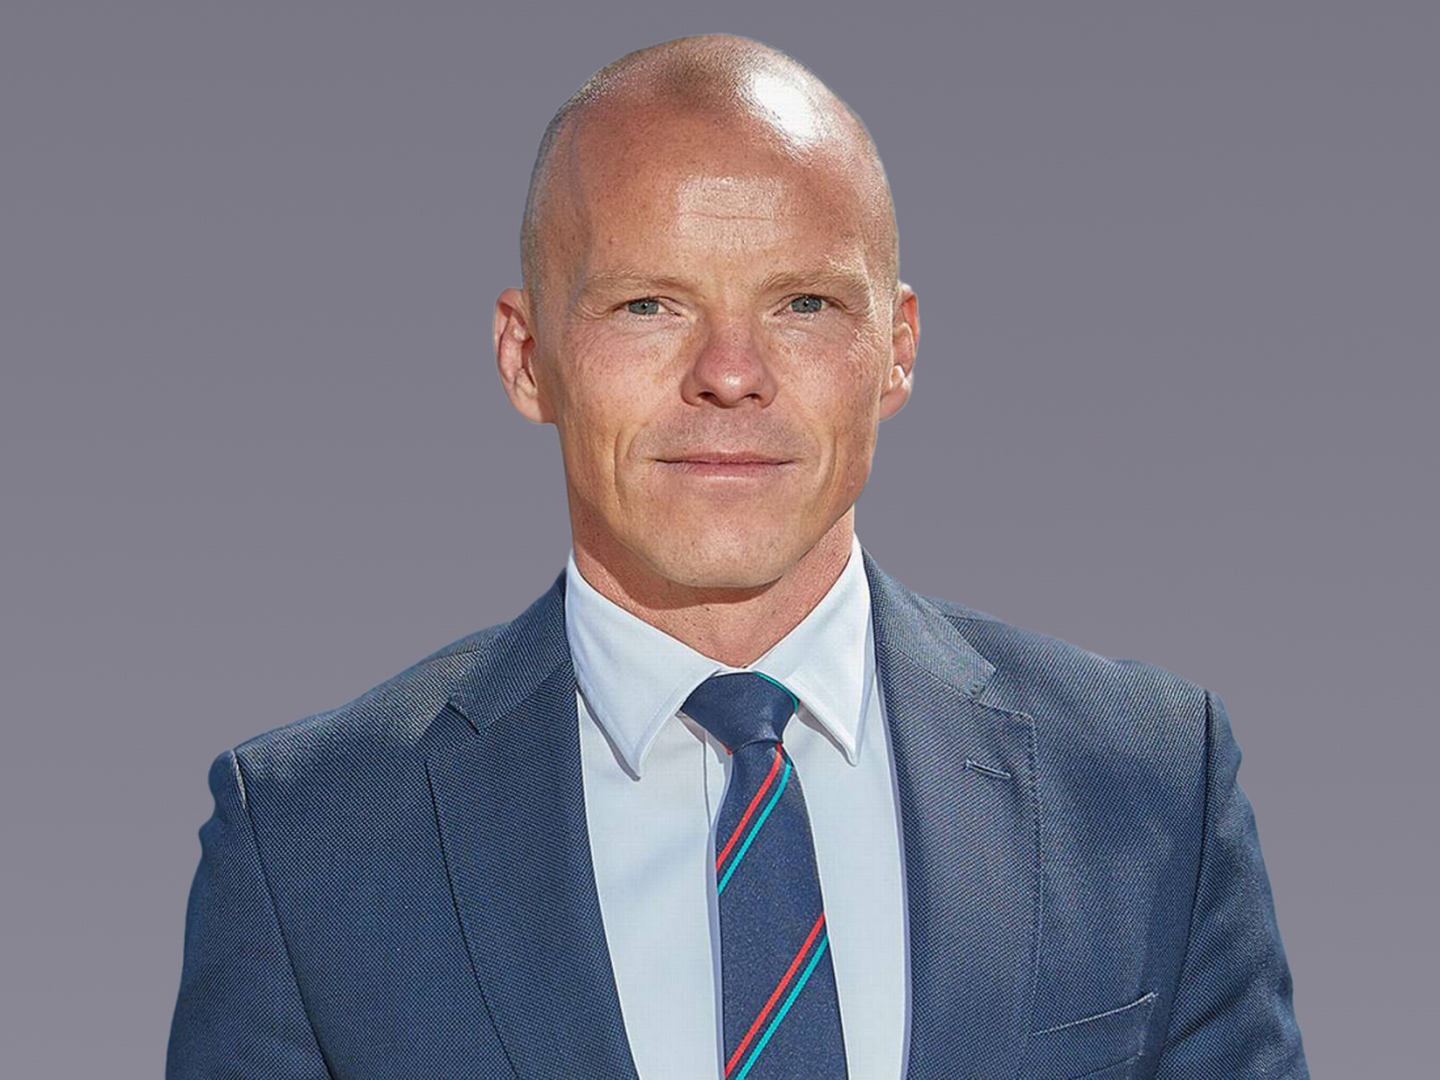 Svend Mølholt is CCO at ship services major Inchcape. | Photo: Inchcape Shipping Services